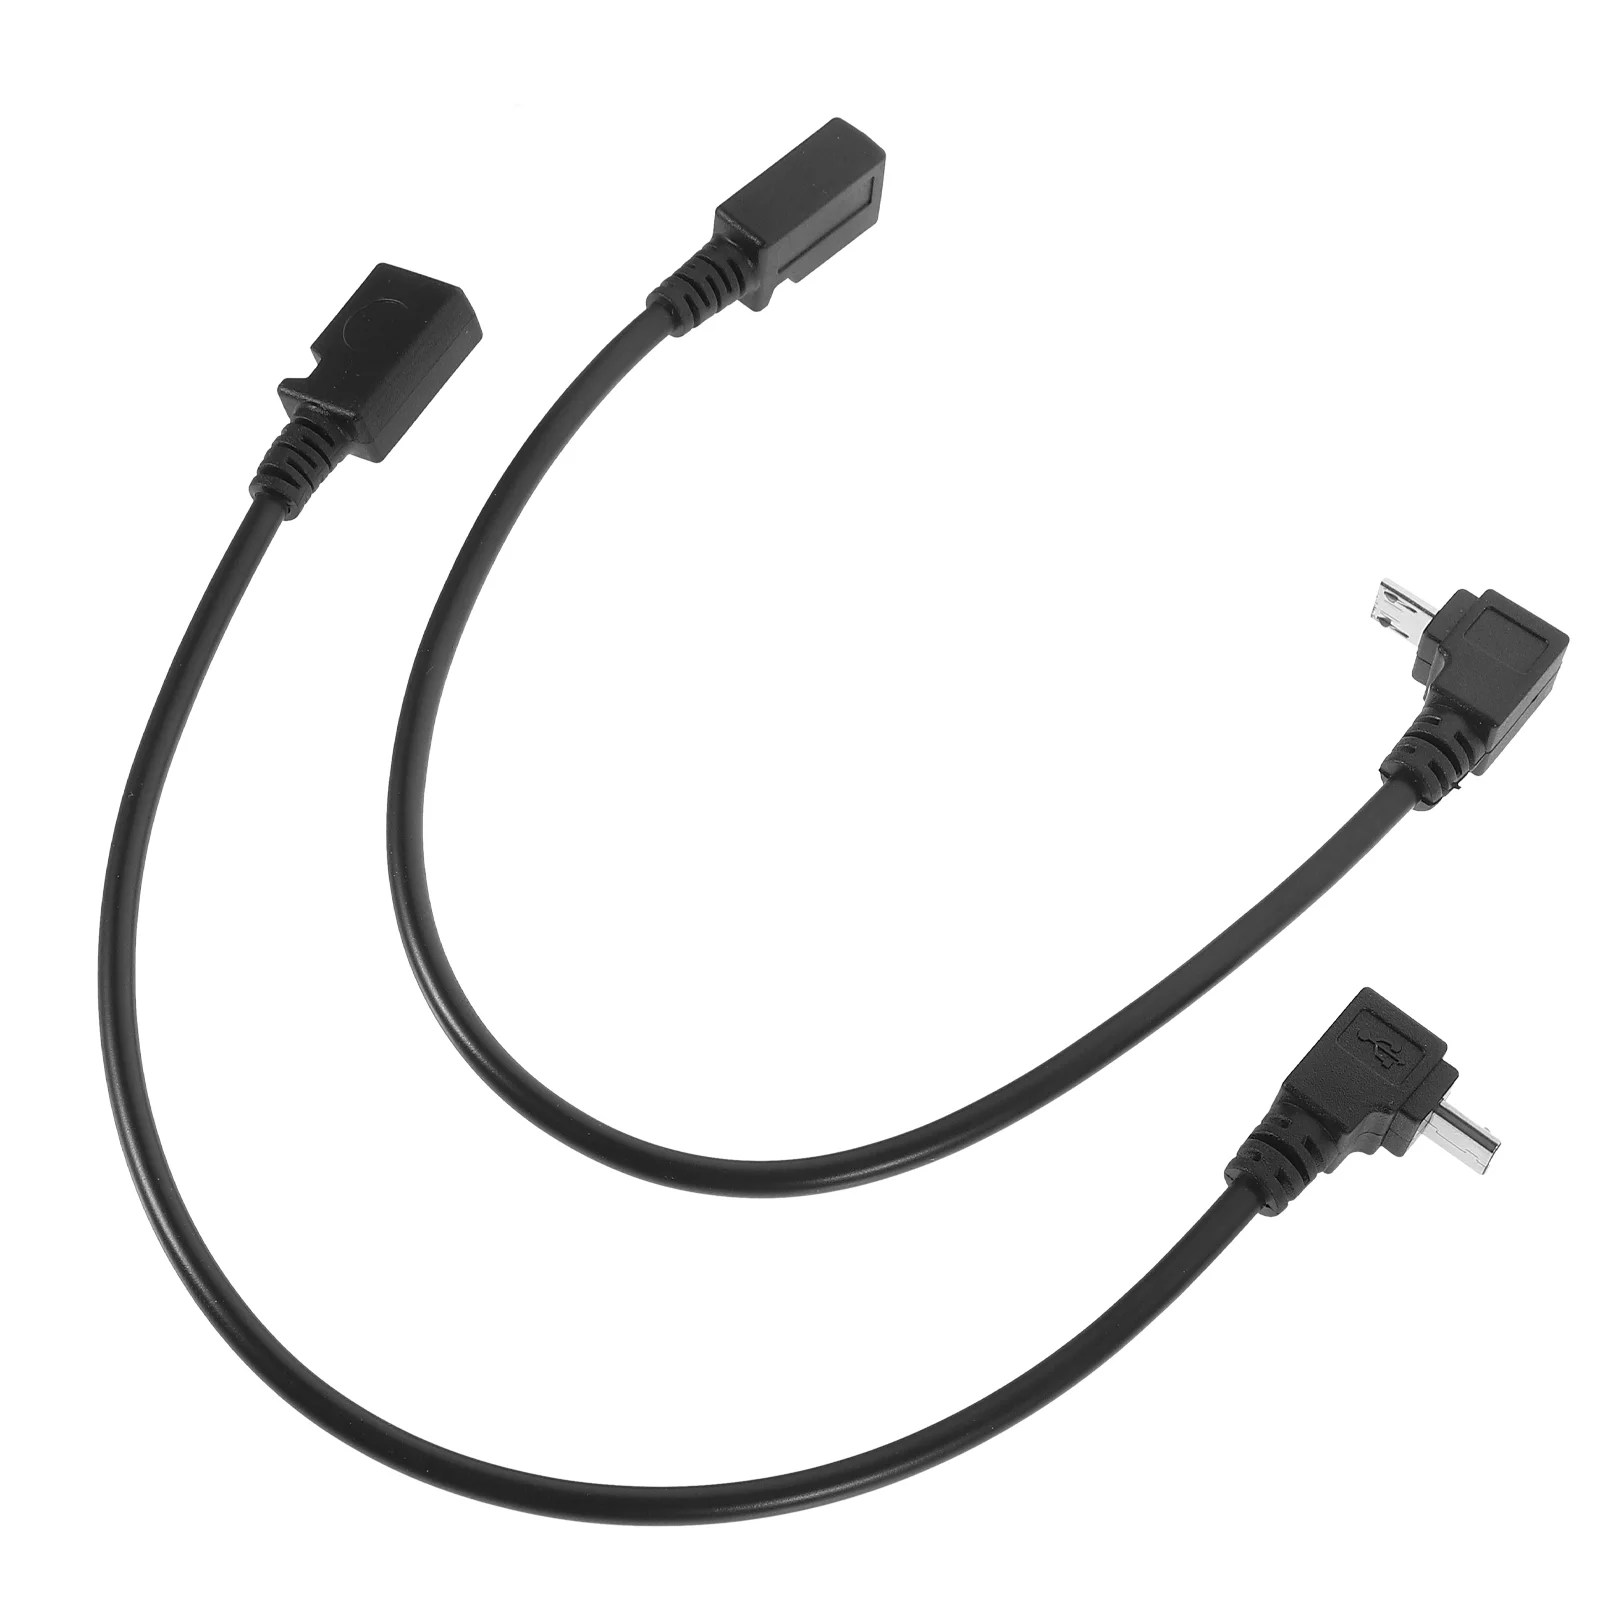 

2 Pcs Charging Cable Short Micro USB Elbow Right Angle Angled Fast Data Sync 90 Degree Transfer